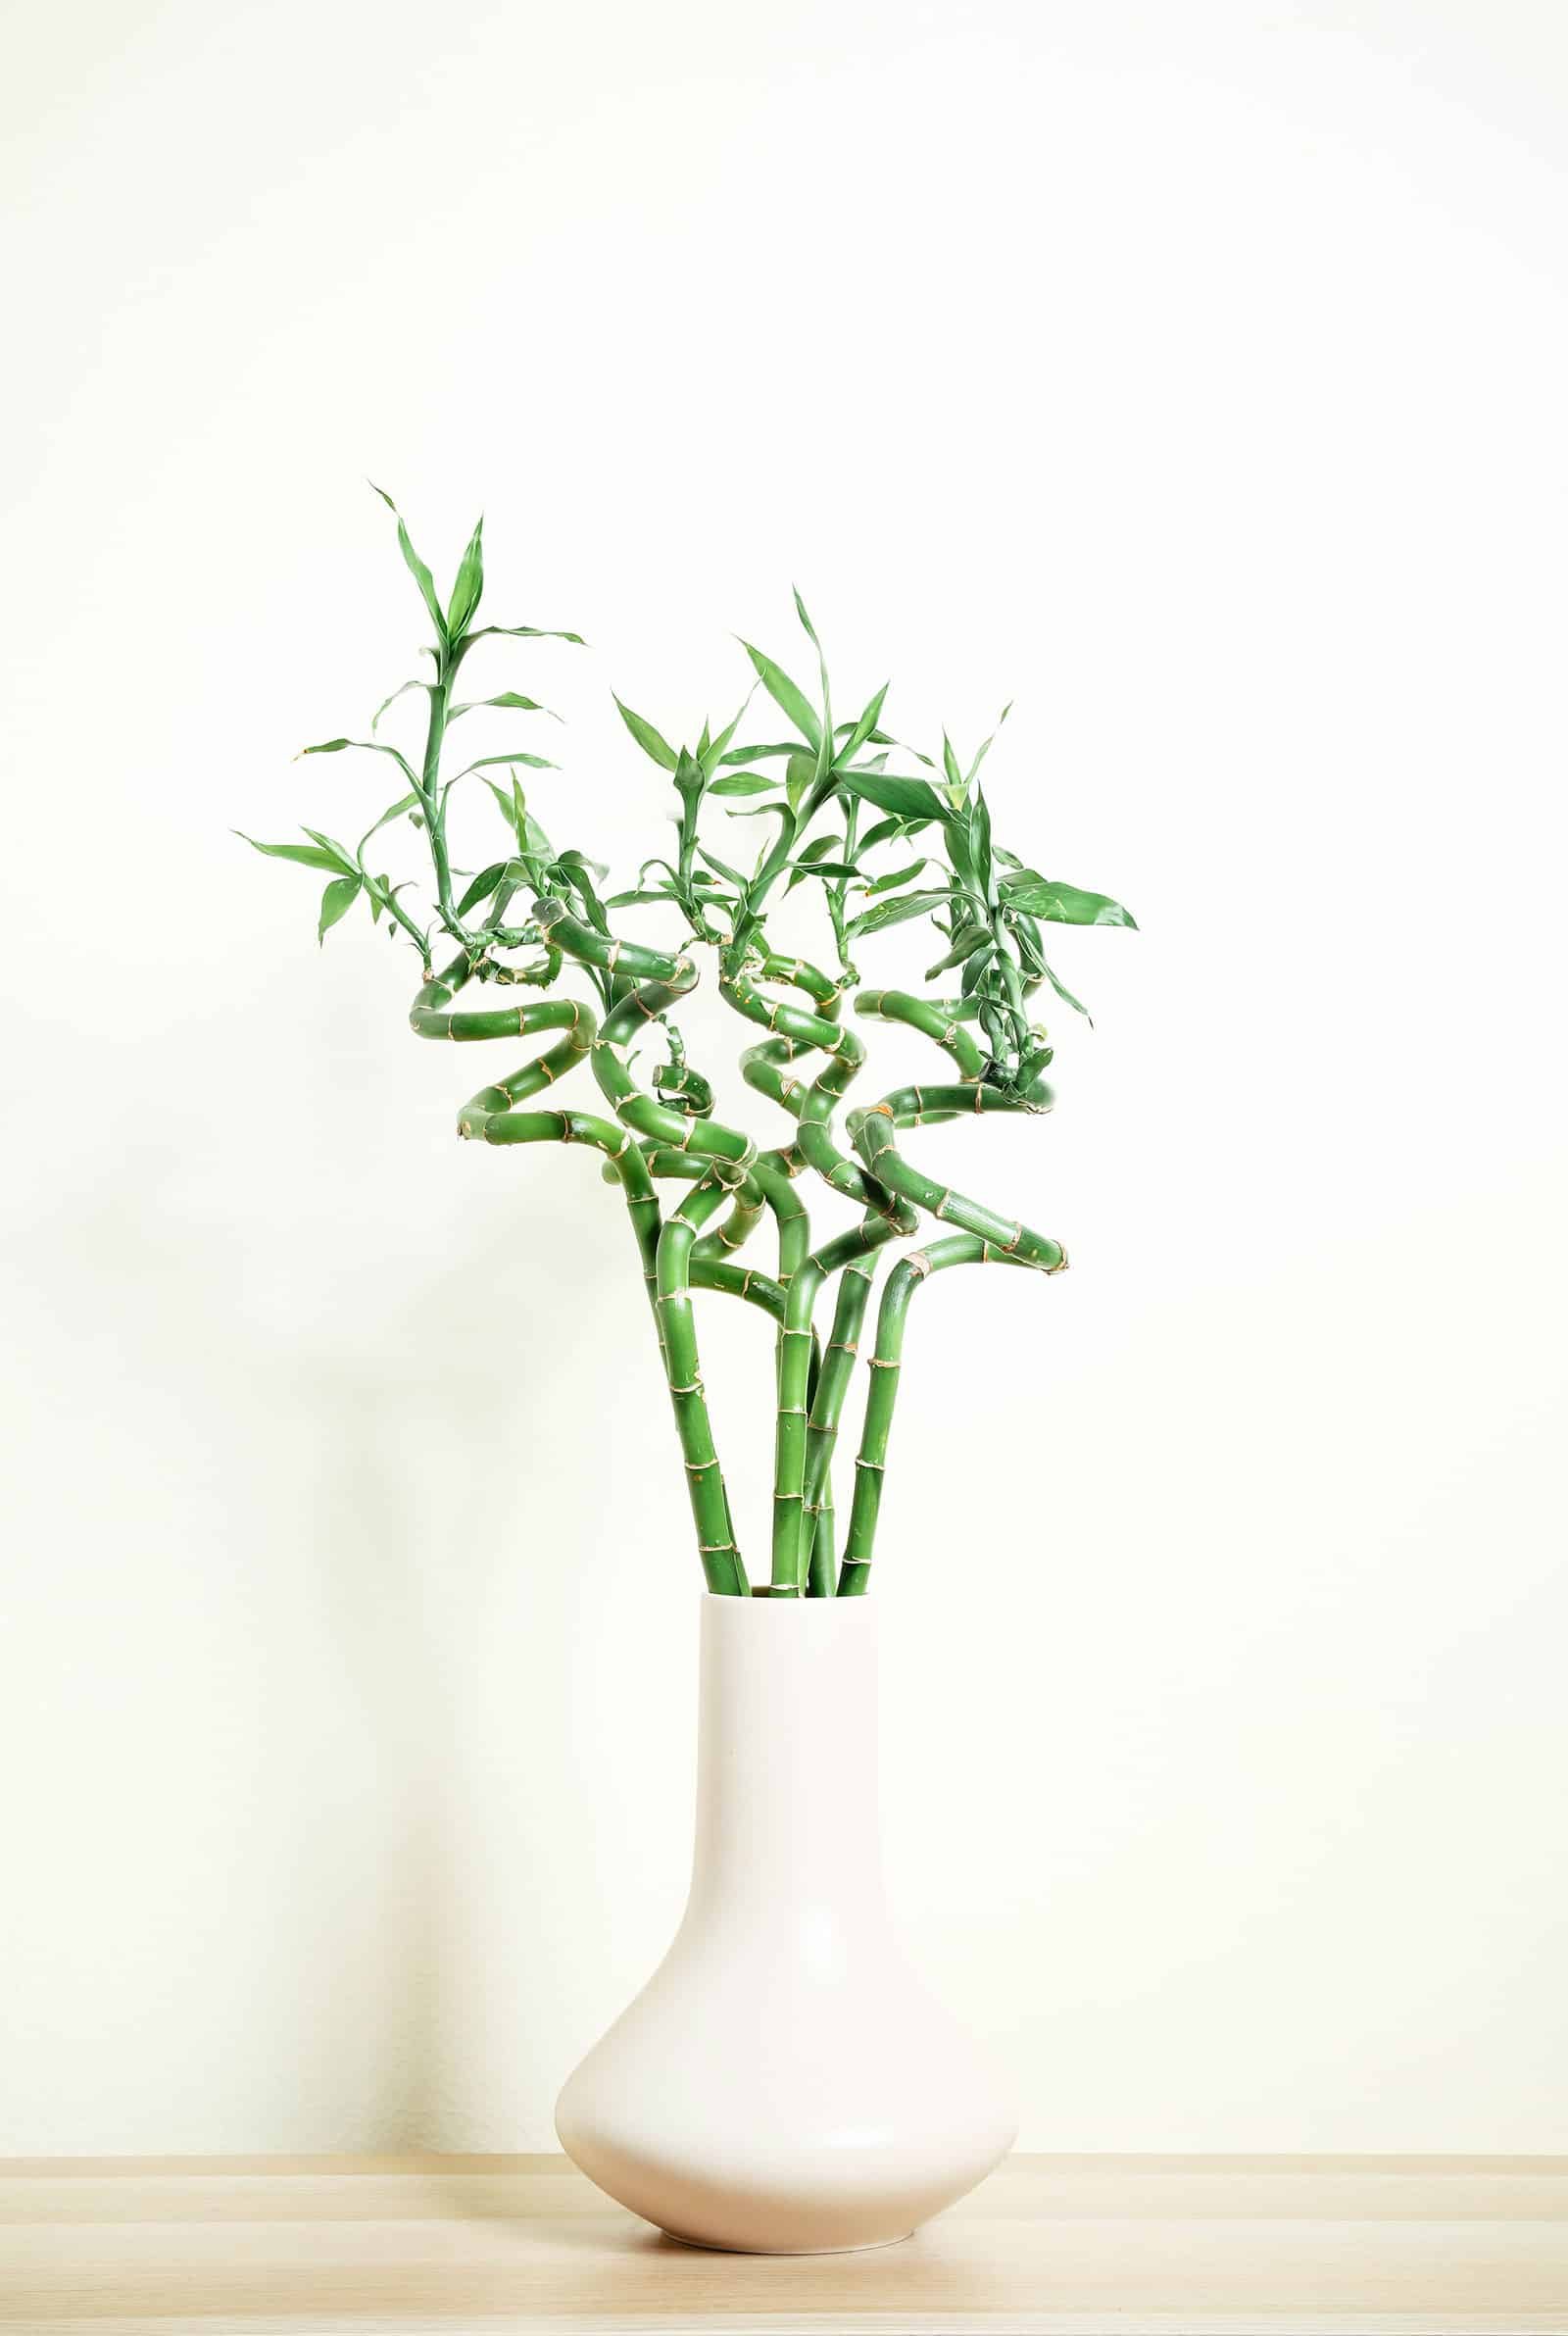 Seven lucky bamboo stems with spirals in a tall white vase against a white backdrop